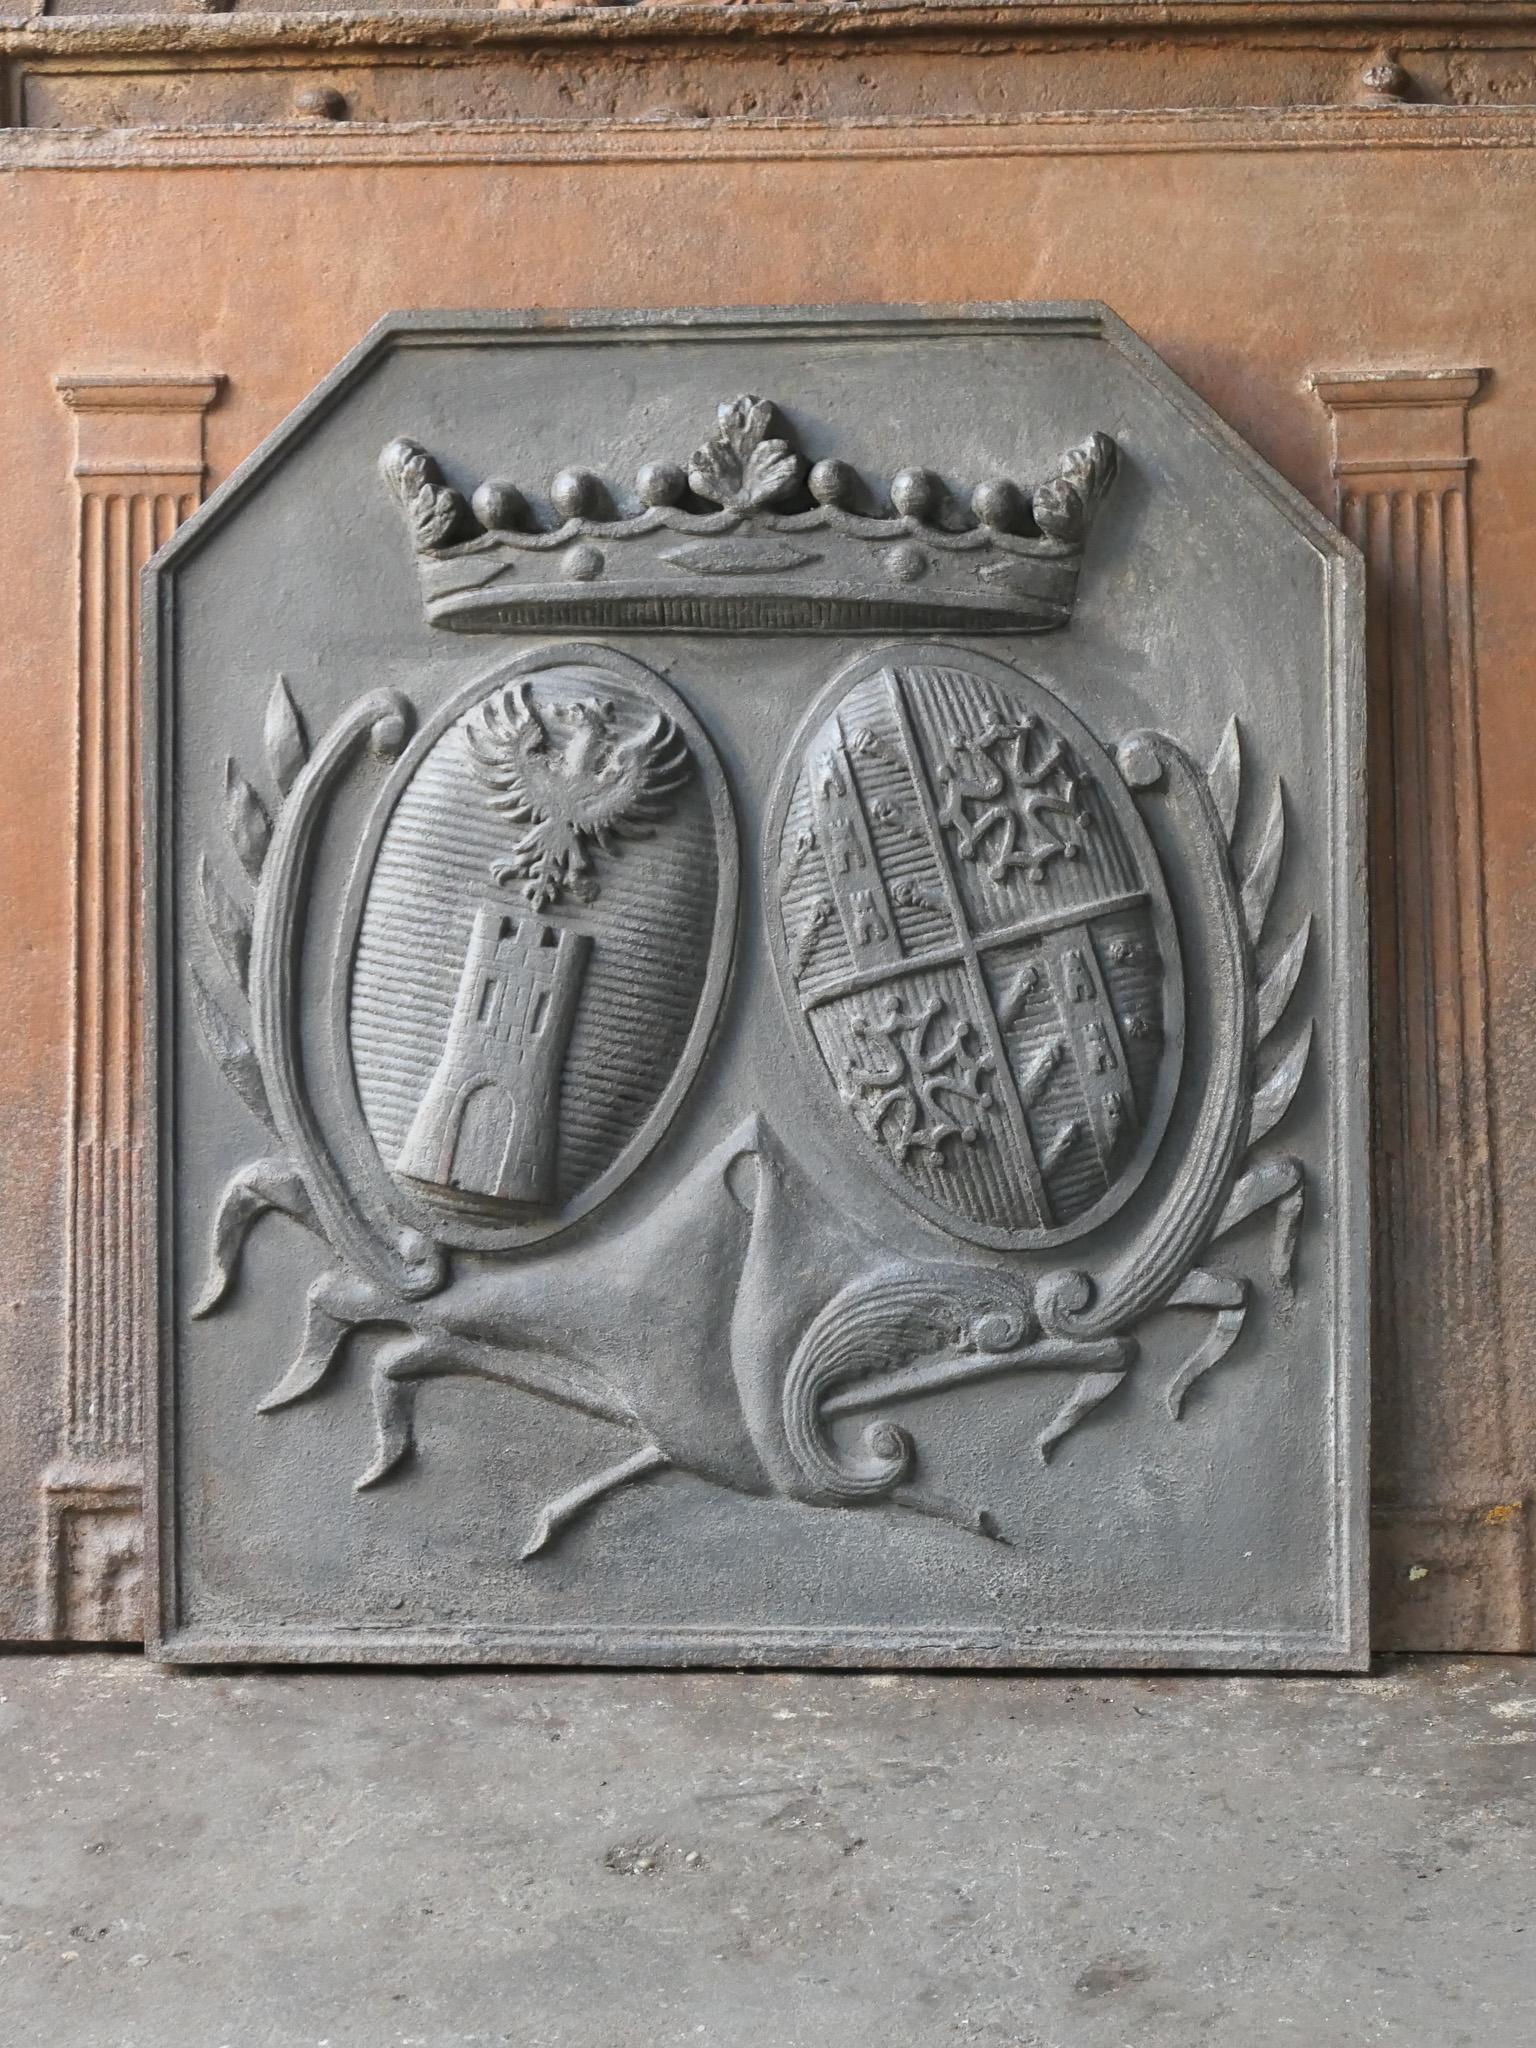 Beautiful 20th century French Louis XIV style fireback with a coat of arms. 

The fireback is made of cast iron. It can be made black / pewter upon request at no extra cost. It is in a good condition, no cracks.

This product weighs more than 65 kg